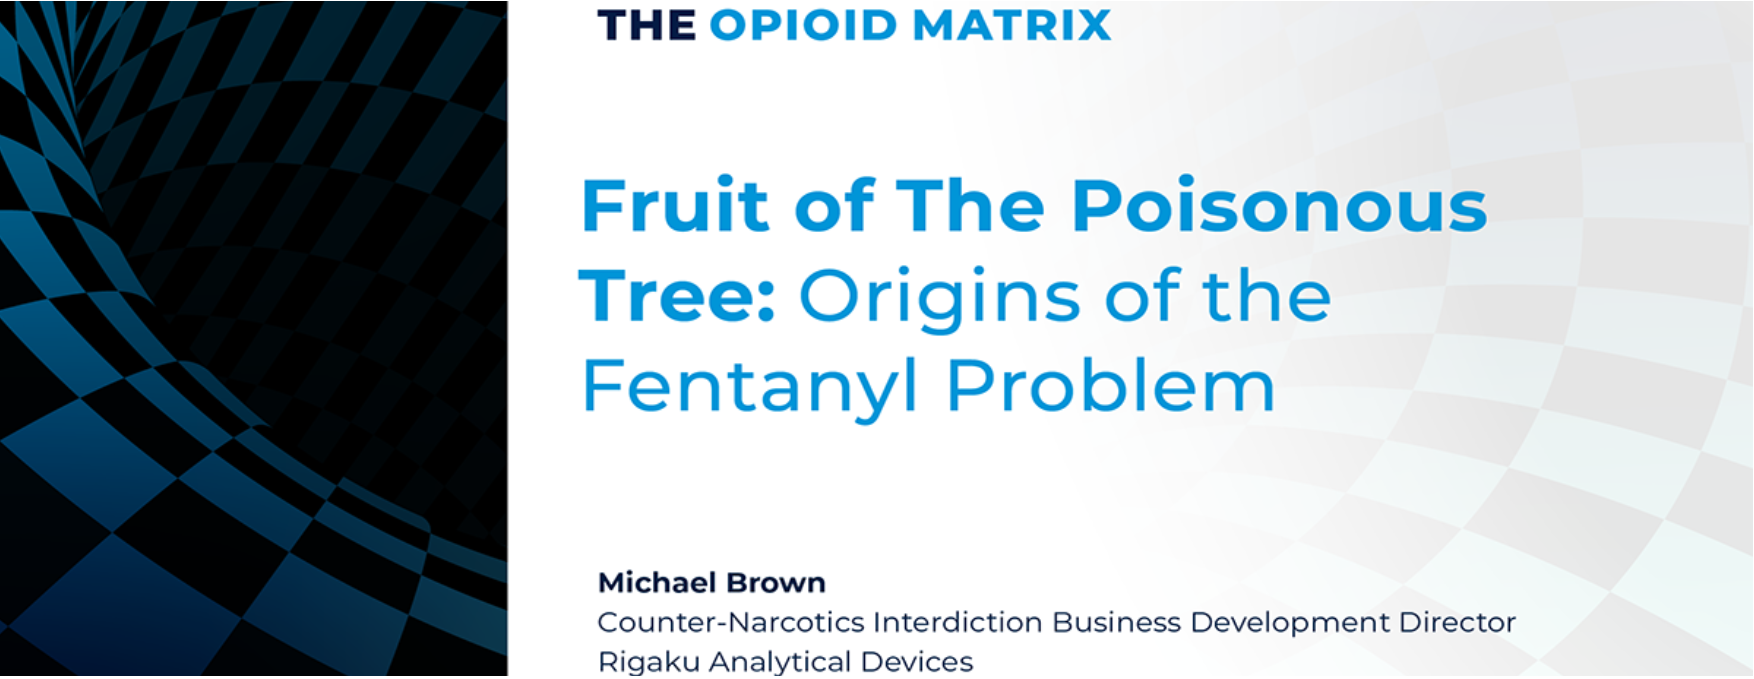 The Opioid Matrix: Fruit of The Poisonous Tree: Origins of the Fentanyl Problem 